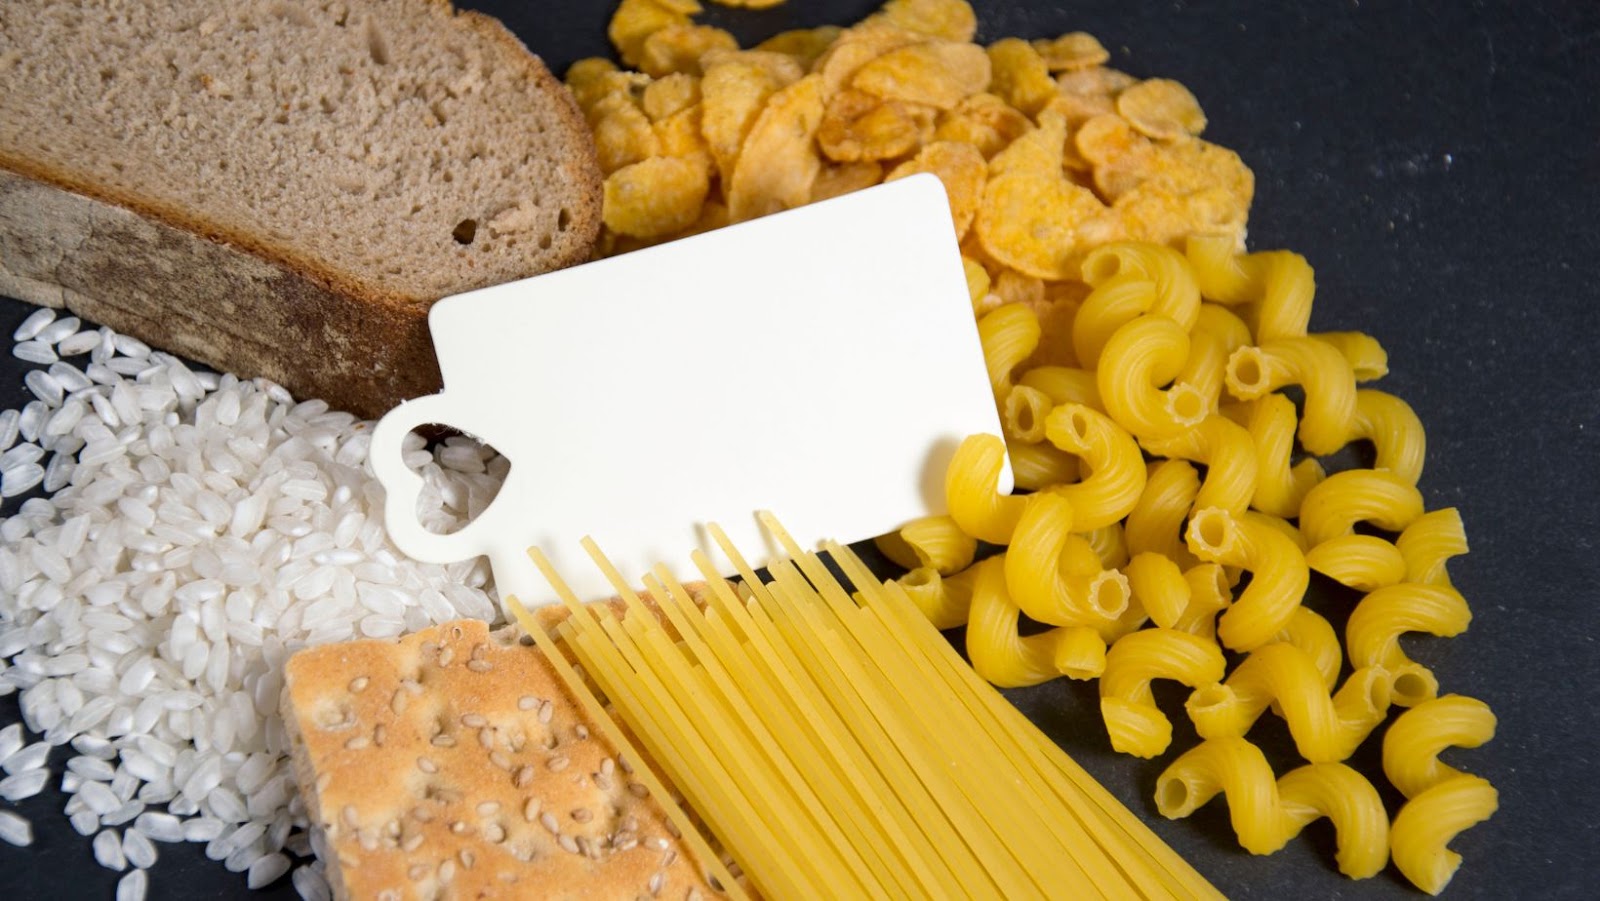 What Are Some Common Foods That Contain Carbohydrates?